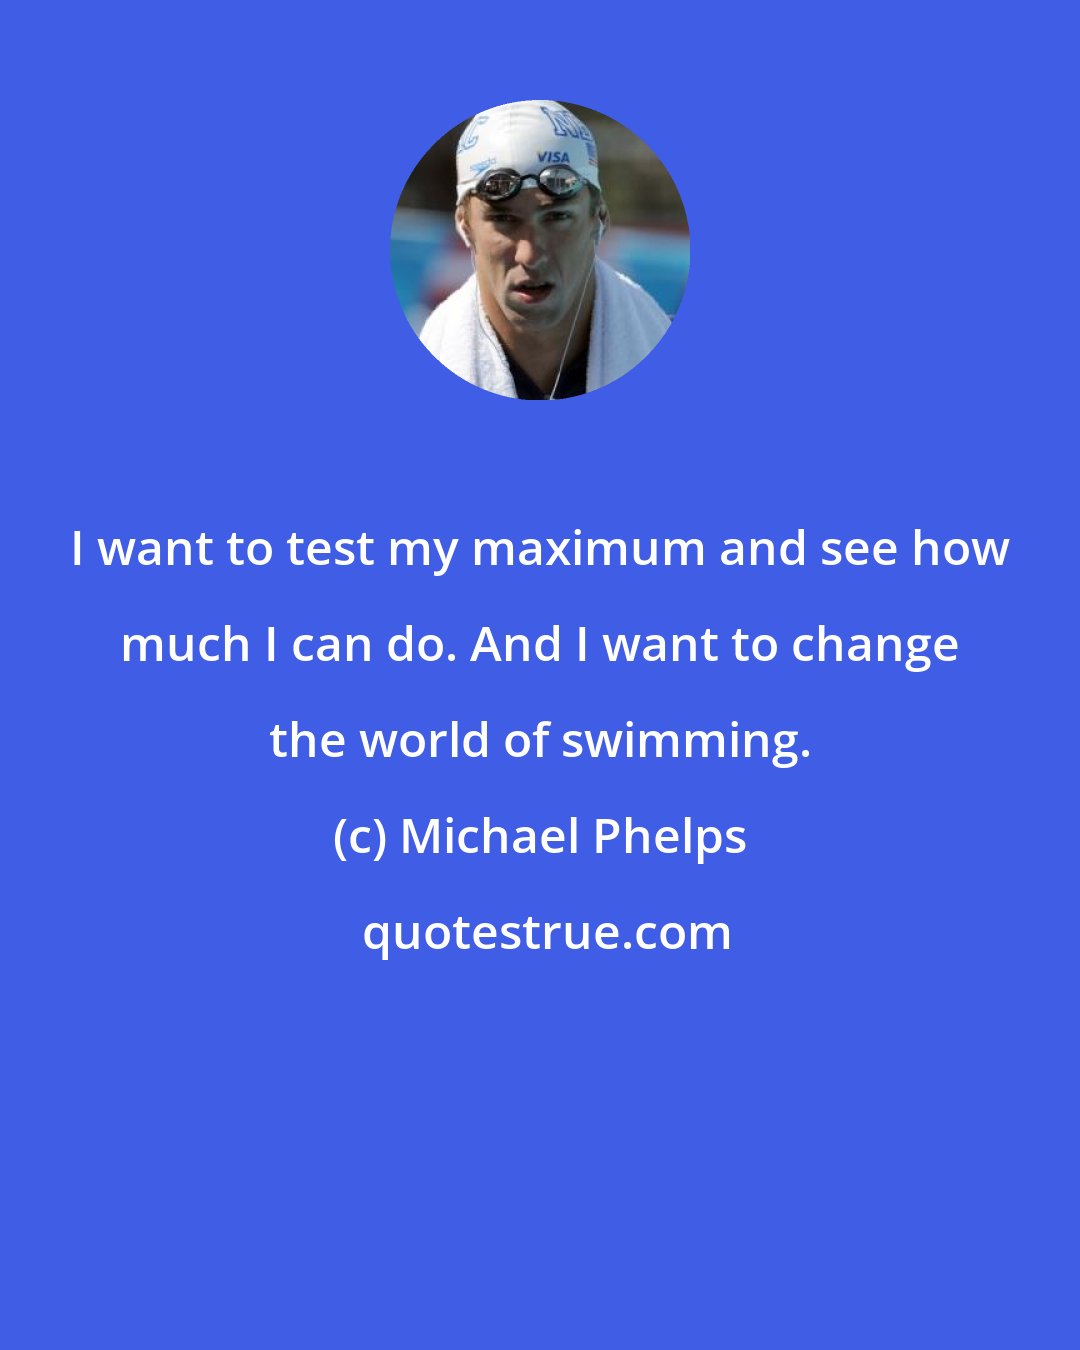 Michael Phelps: I want to test my maximum and see how much I can do. And I want to change the world of swimming.